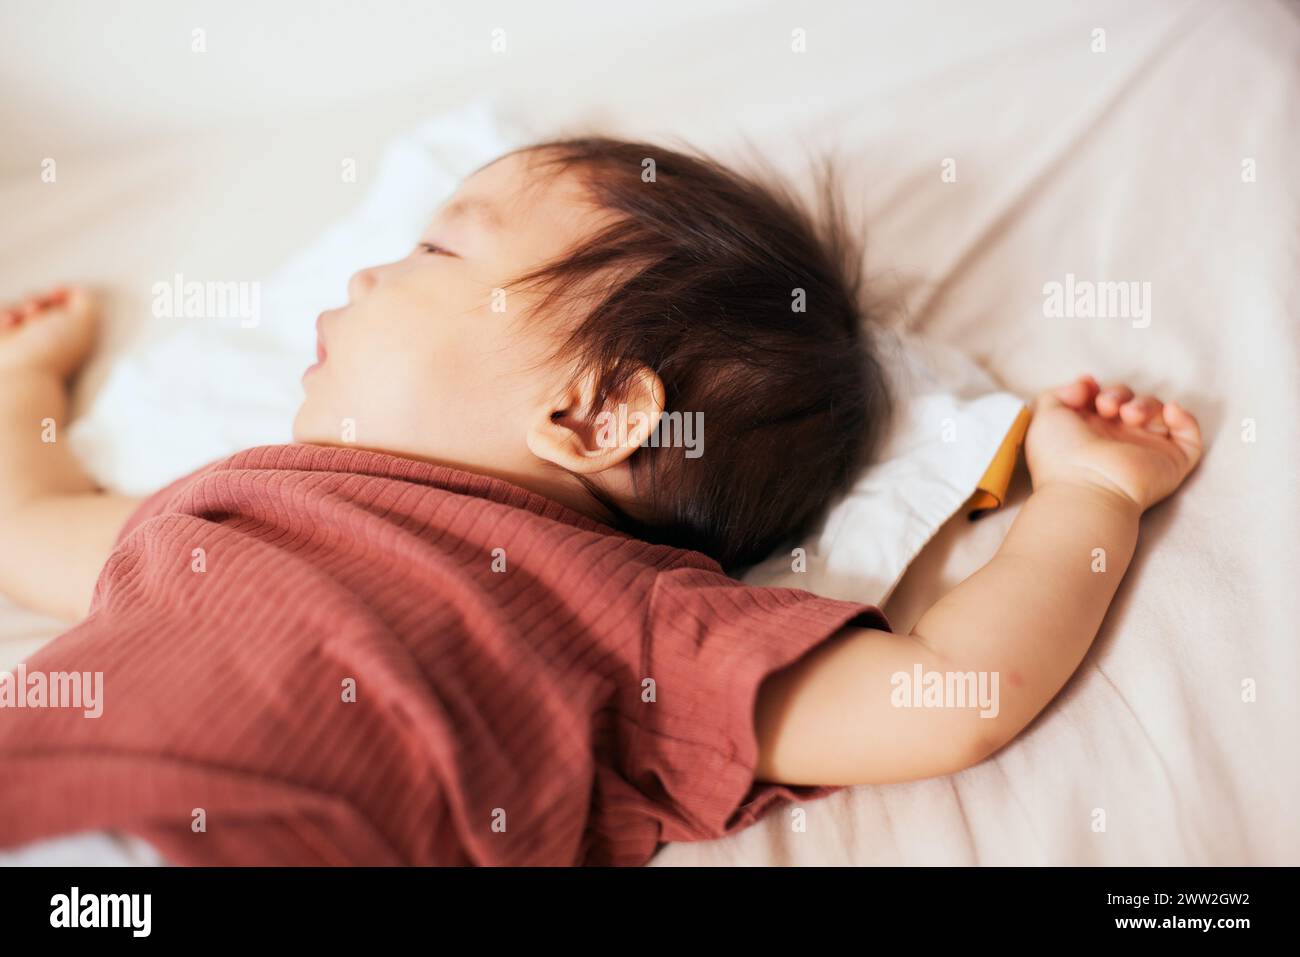 Asian baby sleeping in bed Stock Photo